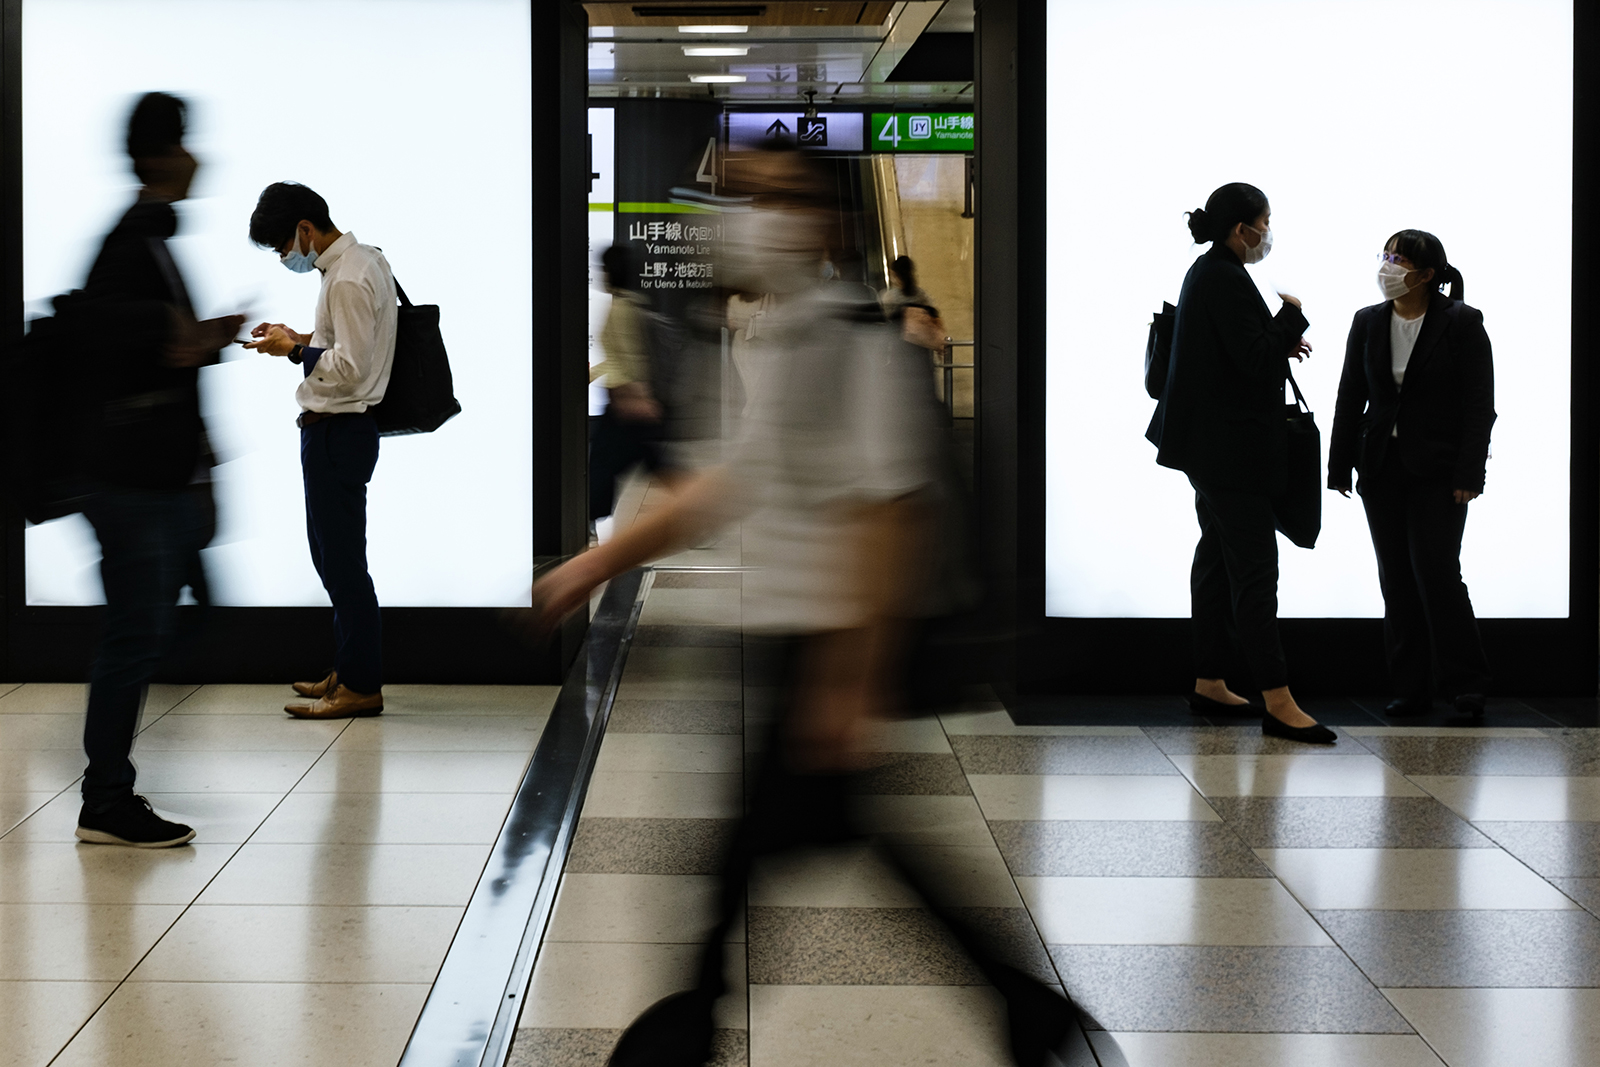 People wearing face masks gather at the Tokyo railway station on July 2.